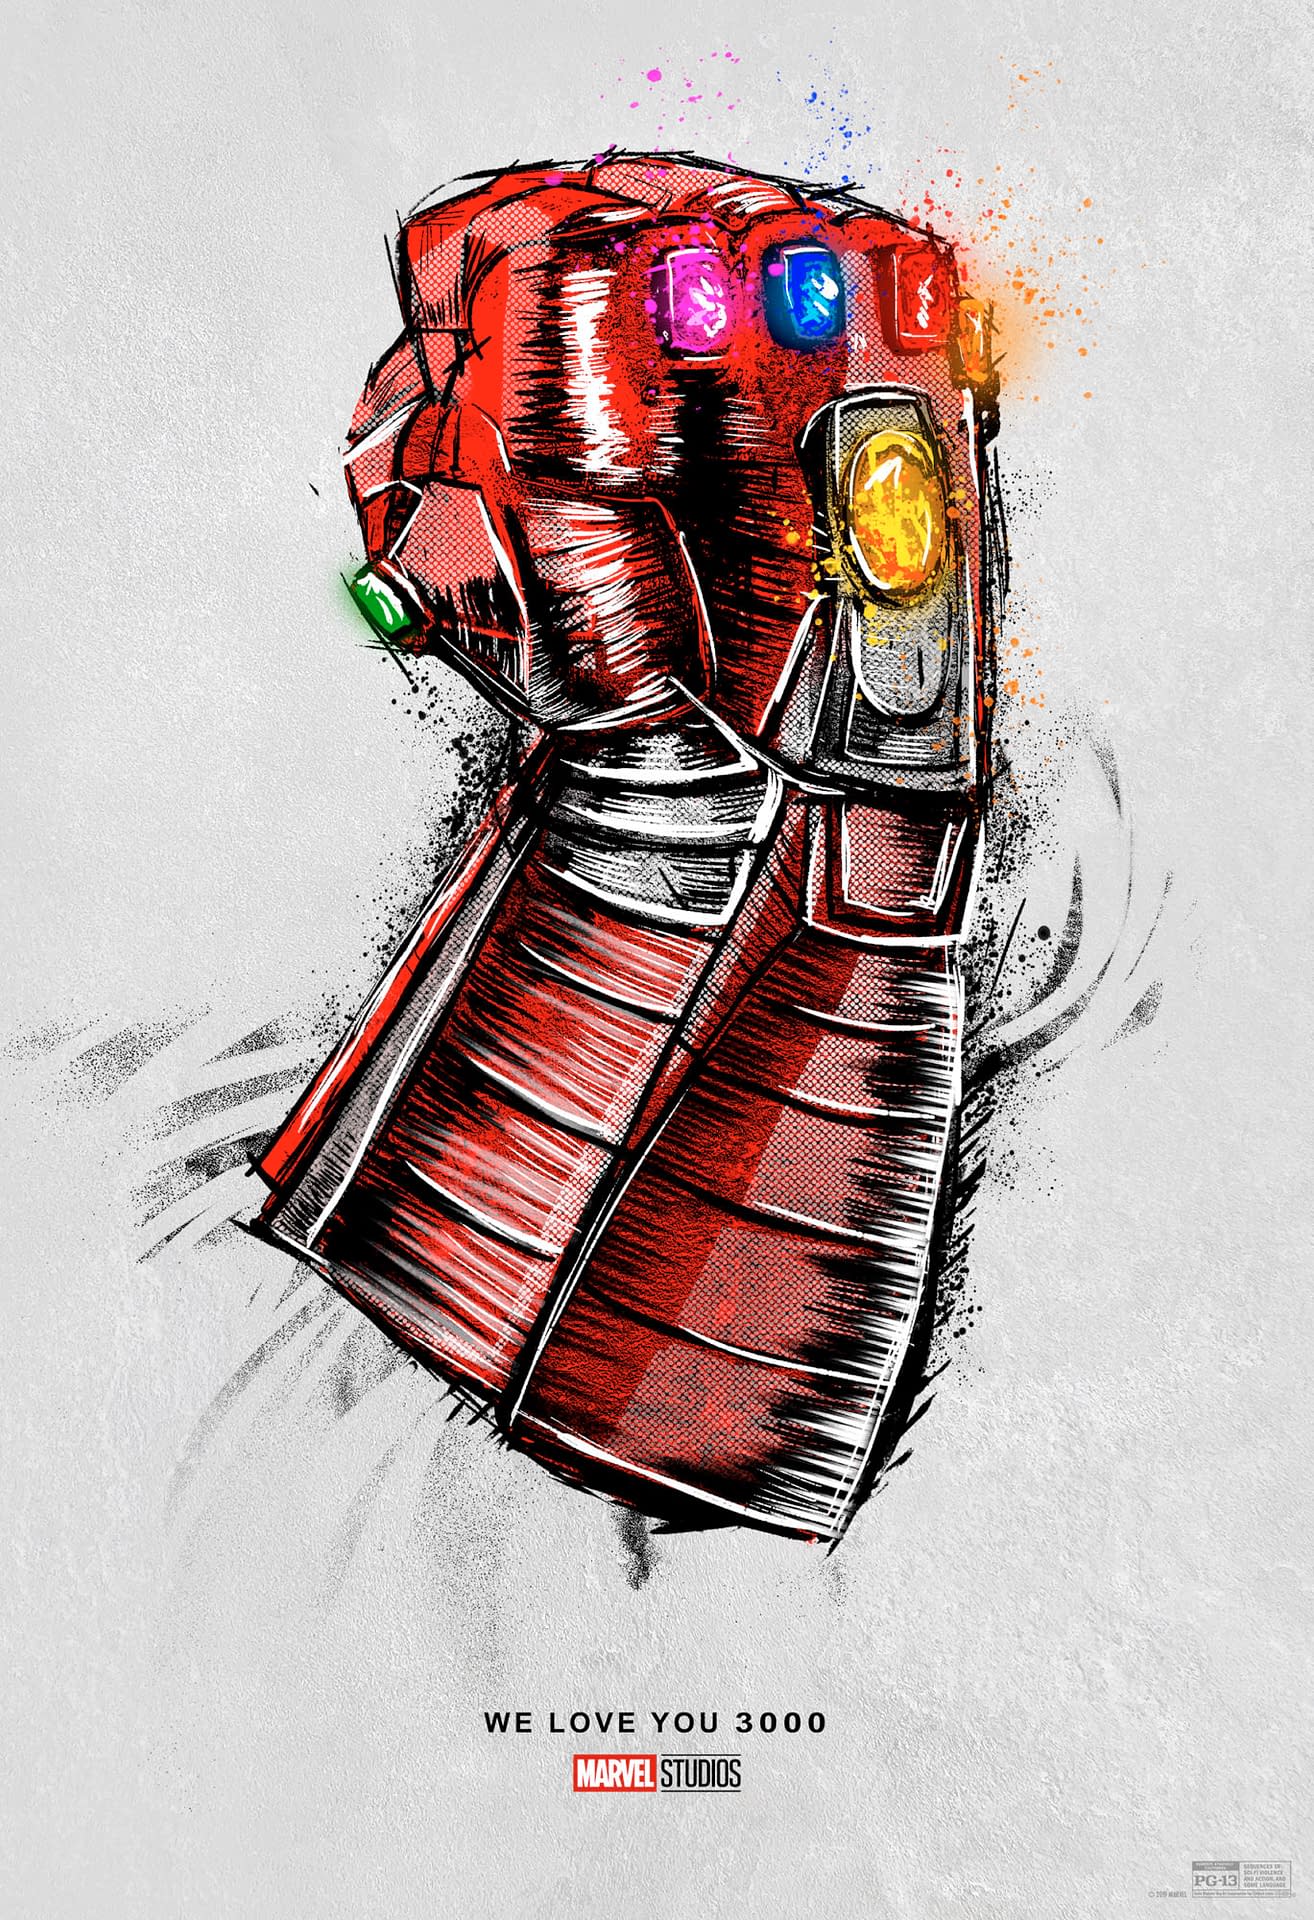 "Avengers: Endgame" Re-Release Tickets Go on Sale, New Poster and Details on the New Content